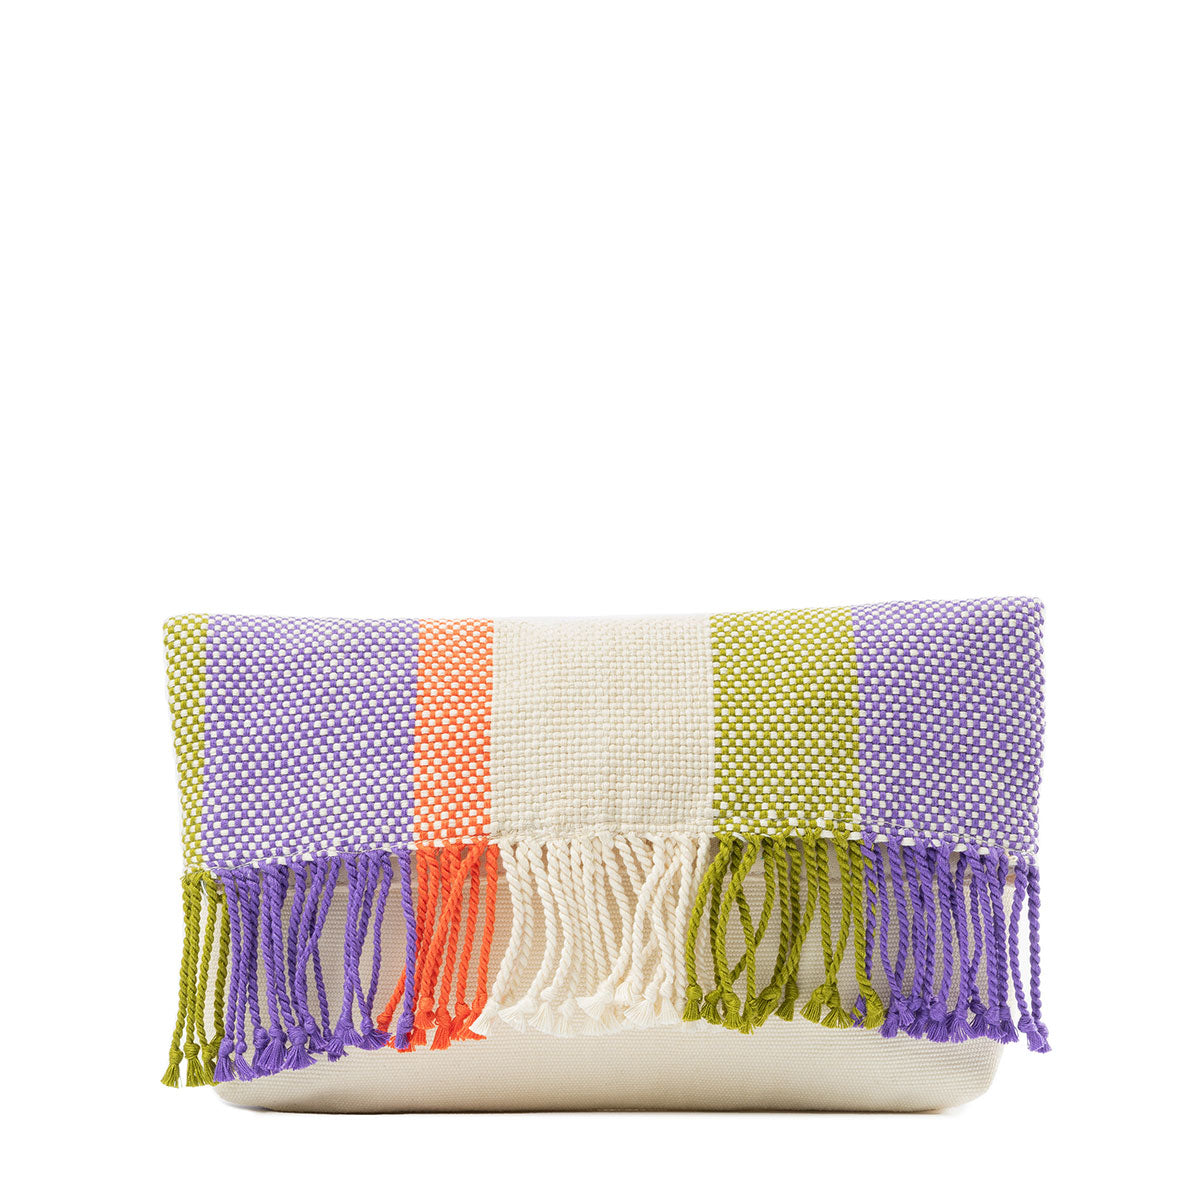 Margarita Clutch Prism Basket Weave. The front is folded over with a woven olive green, purple, and orange pattern and fringe.